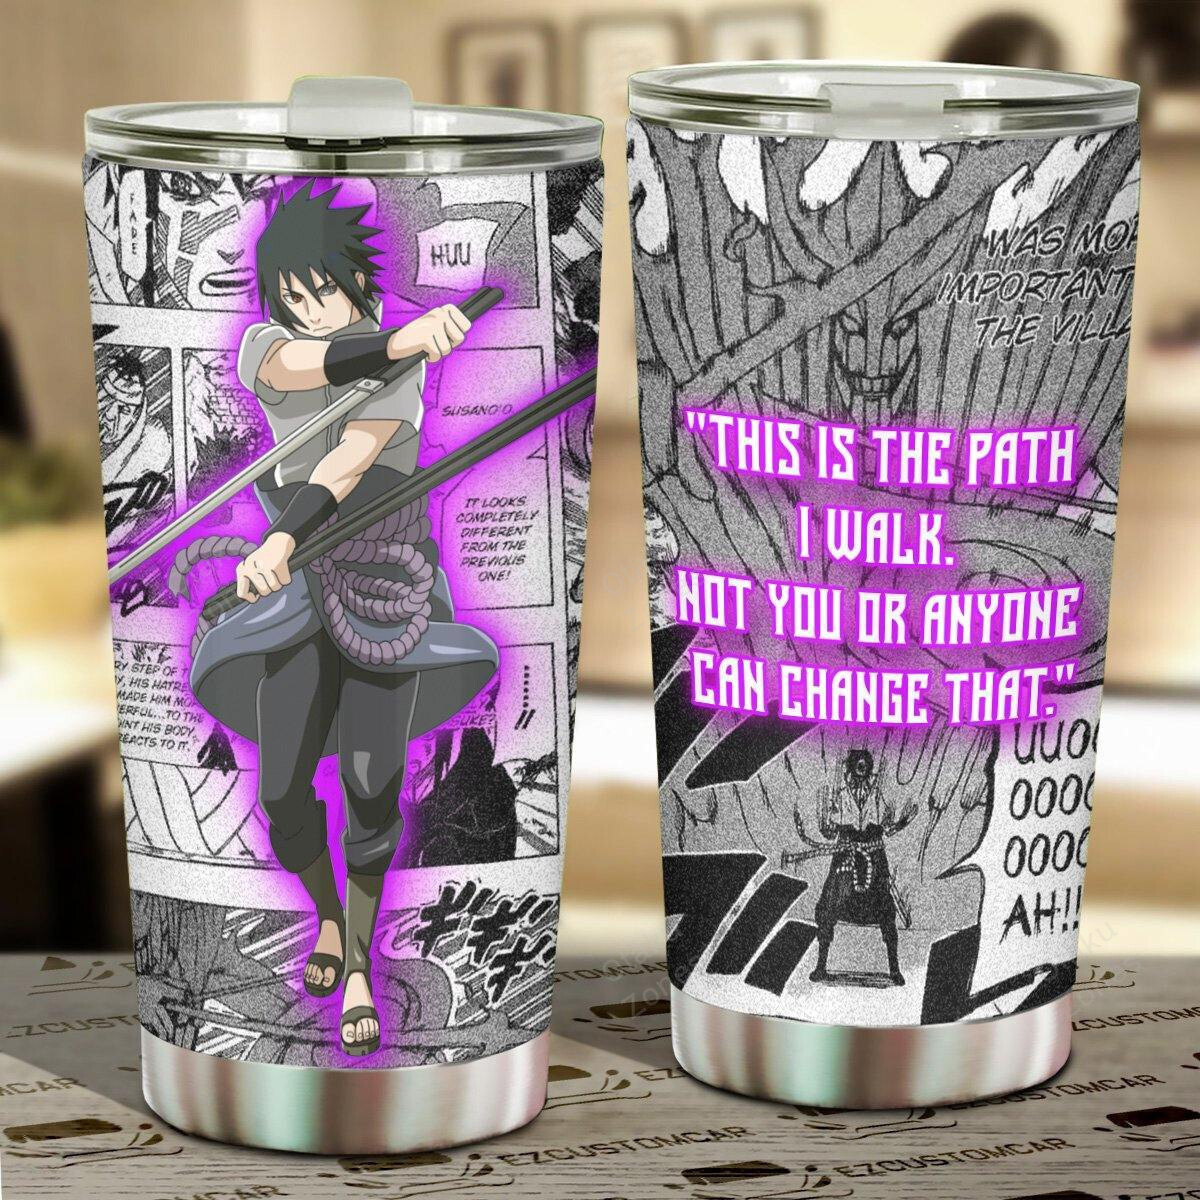 Go ahead and order your new tumbler now! 128